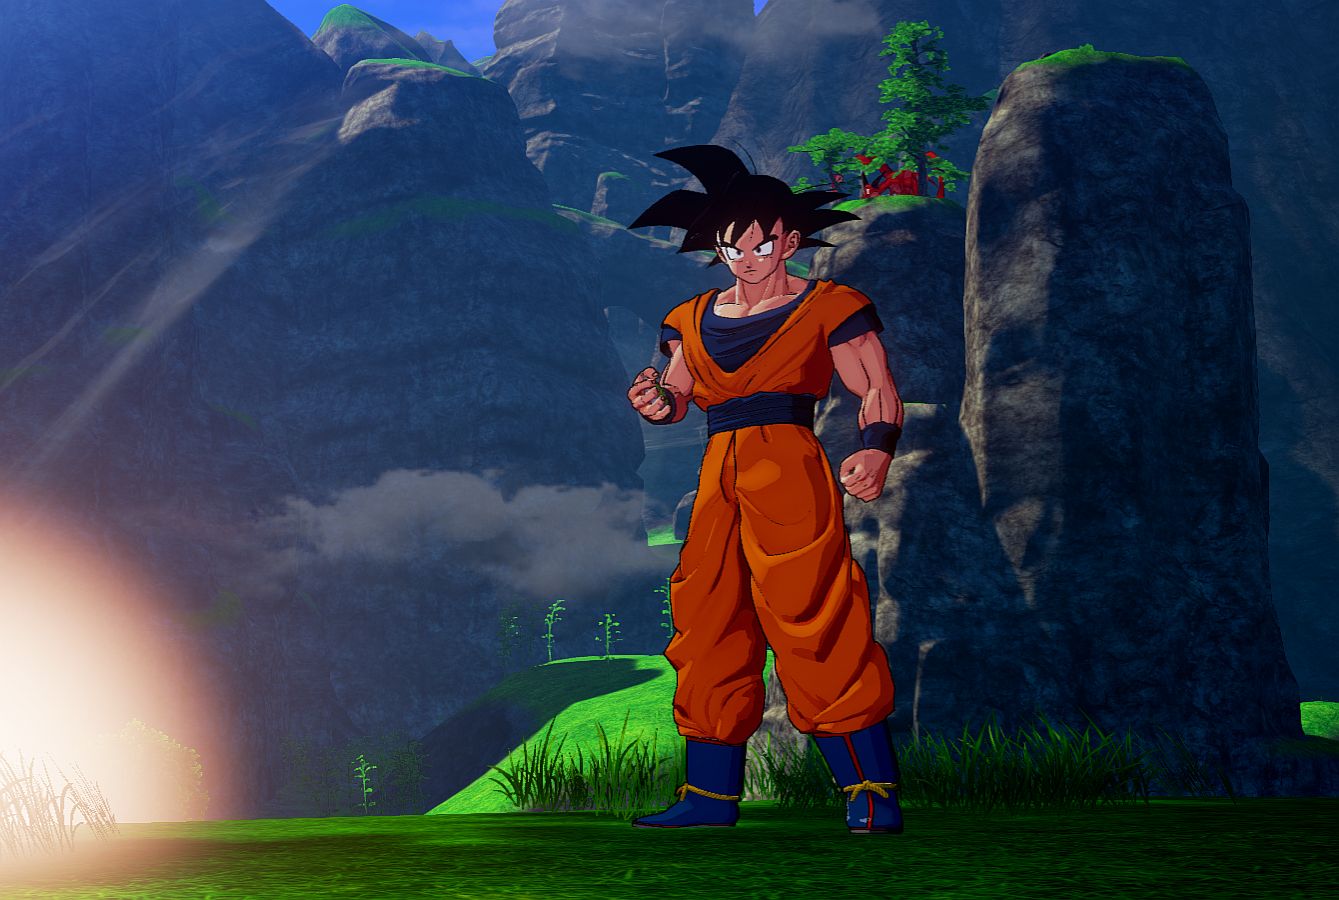 Dragon Ball Z Kakarot Gets New Trunks The Warrior Of Hope Dlc Later This Year Vg247